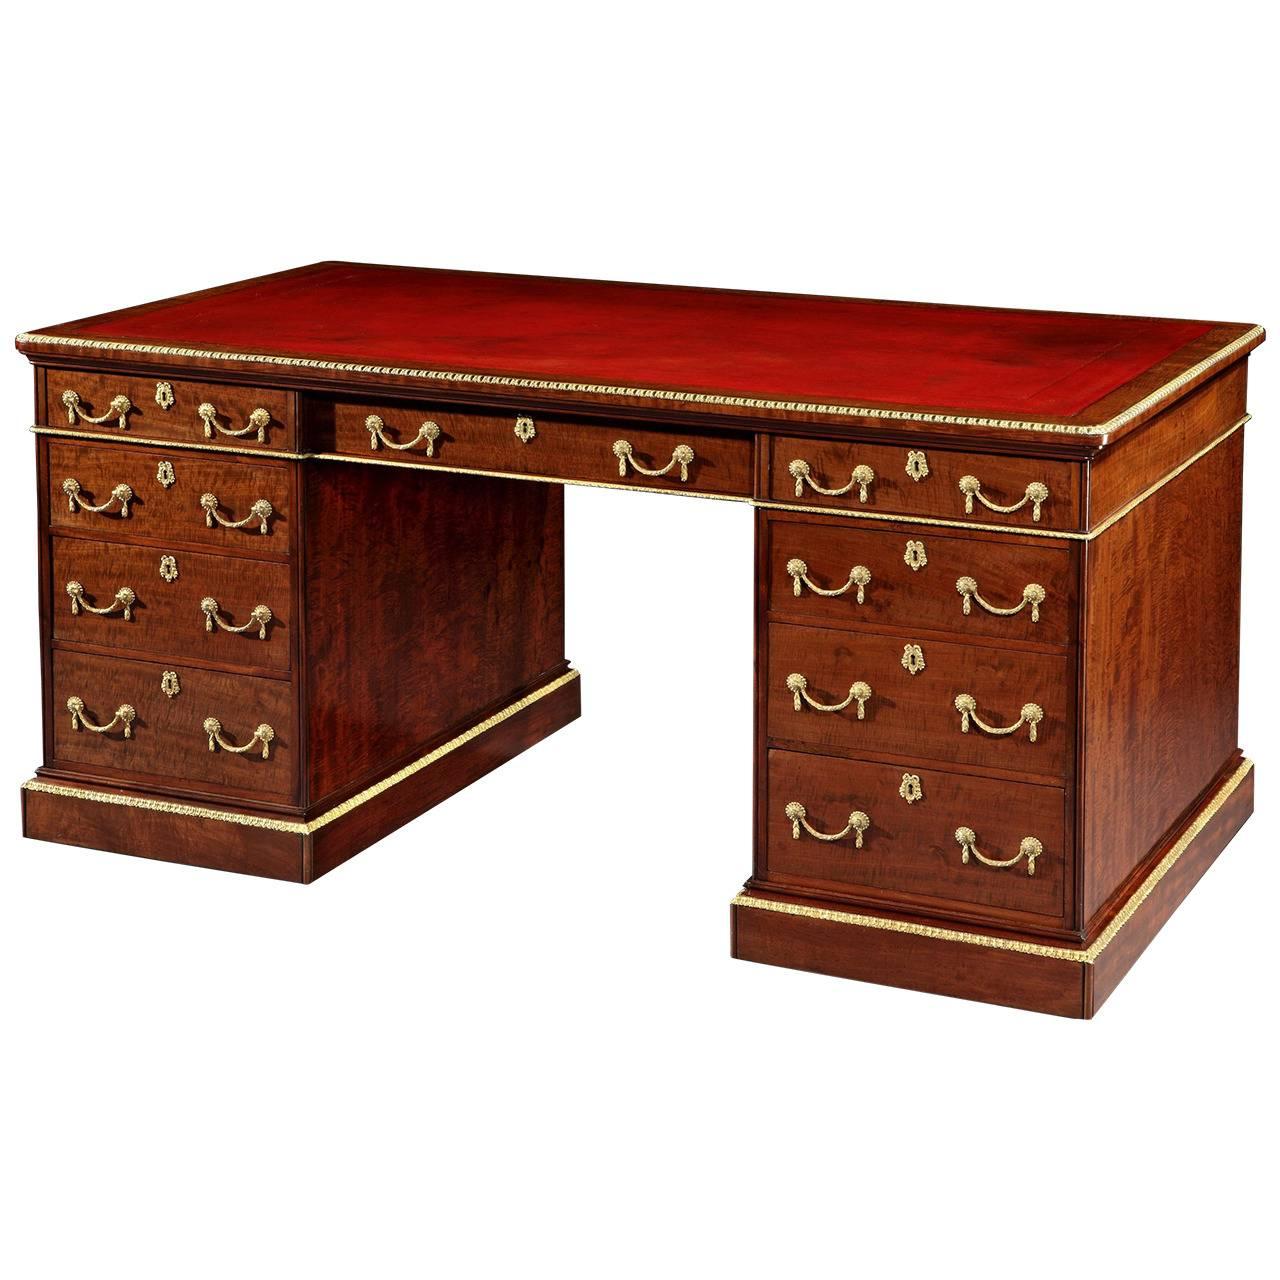 English Mahogany and Ormolu Partners Desk with Red Leather, 19th Century